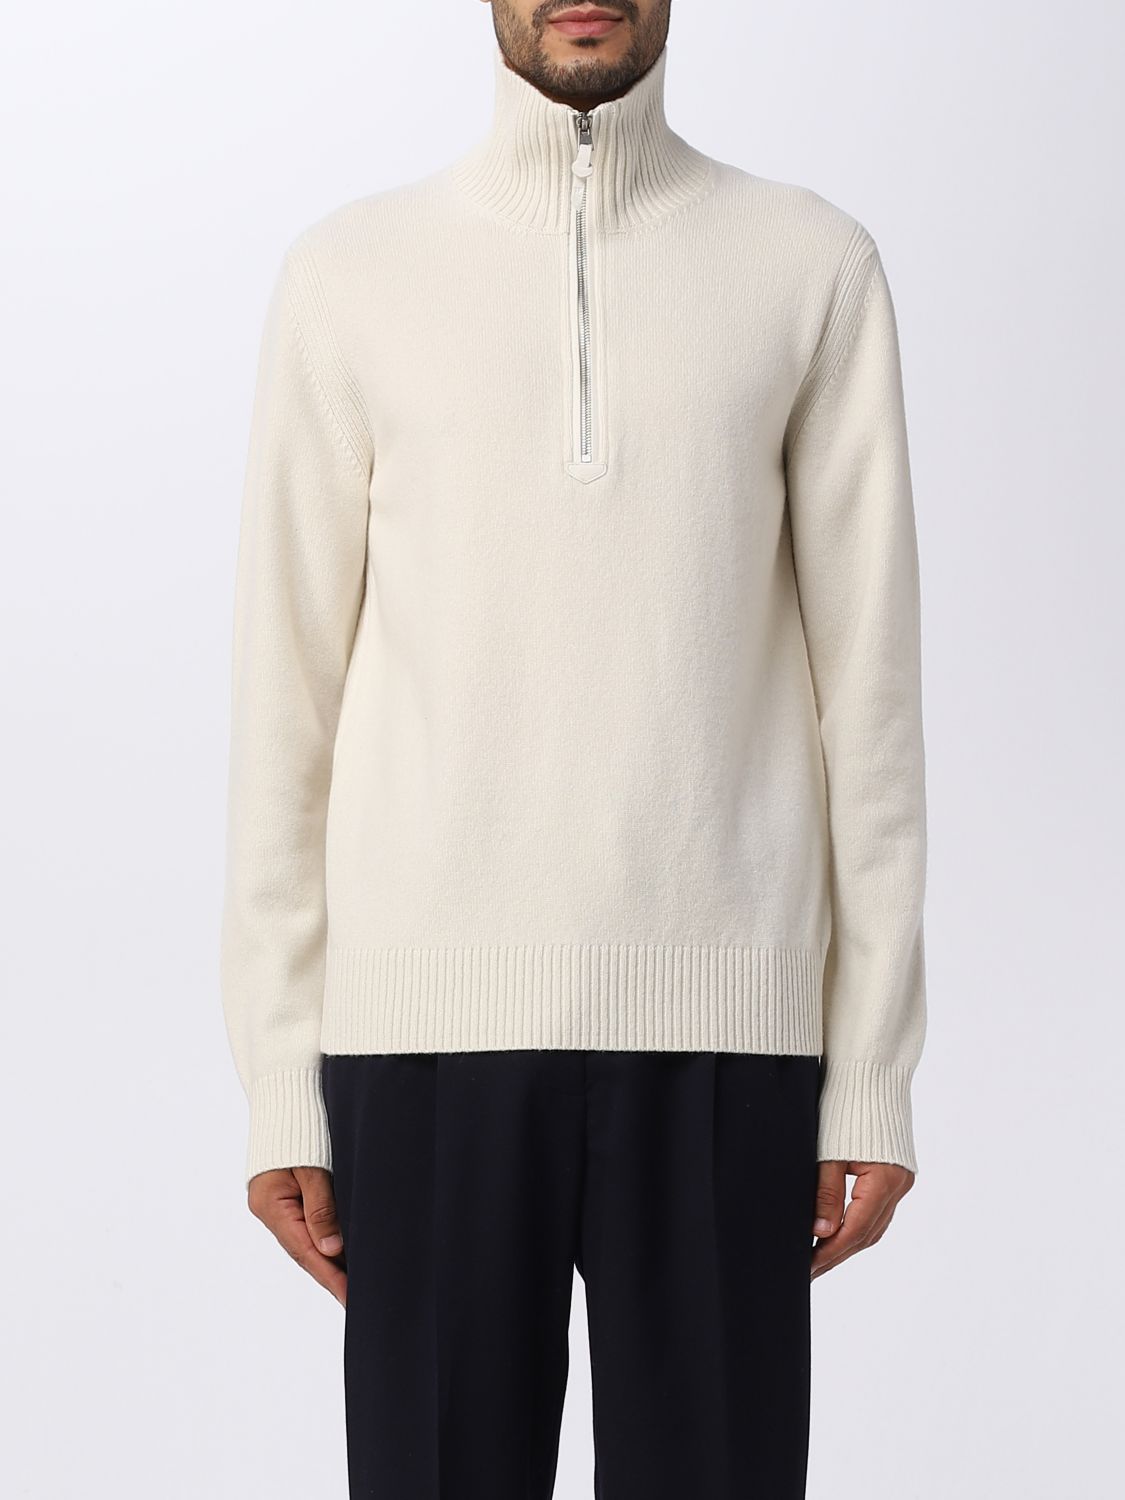 TOM FORD CASHMERE SWEATER WITH ZIP,E53999044